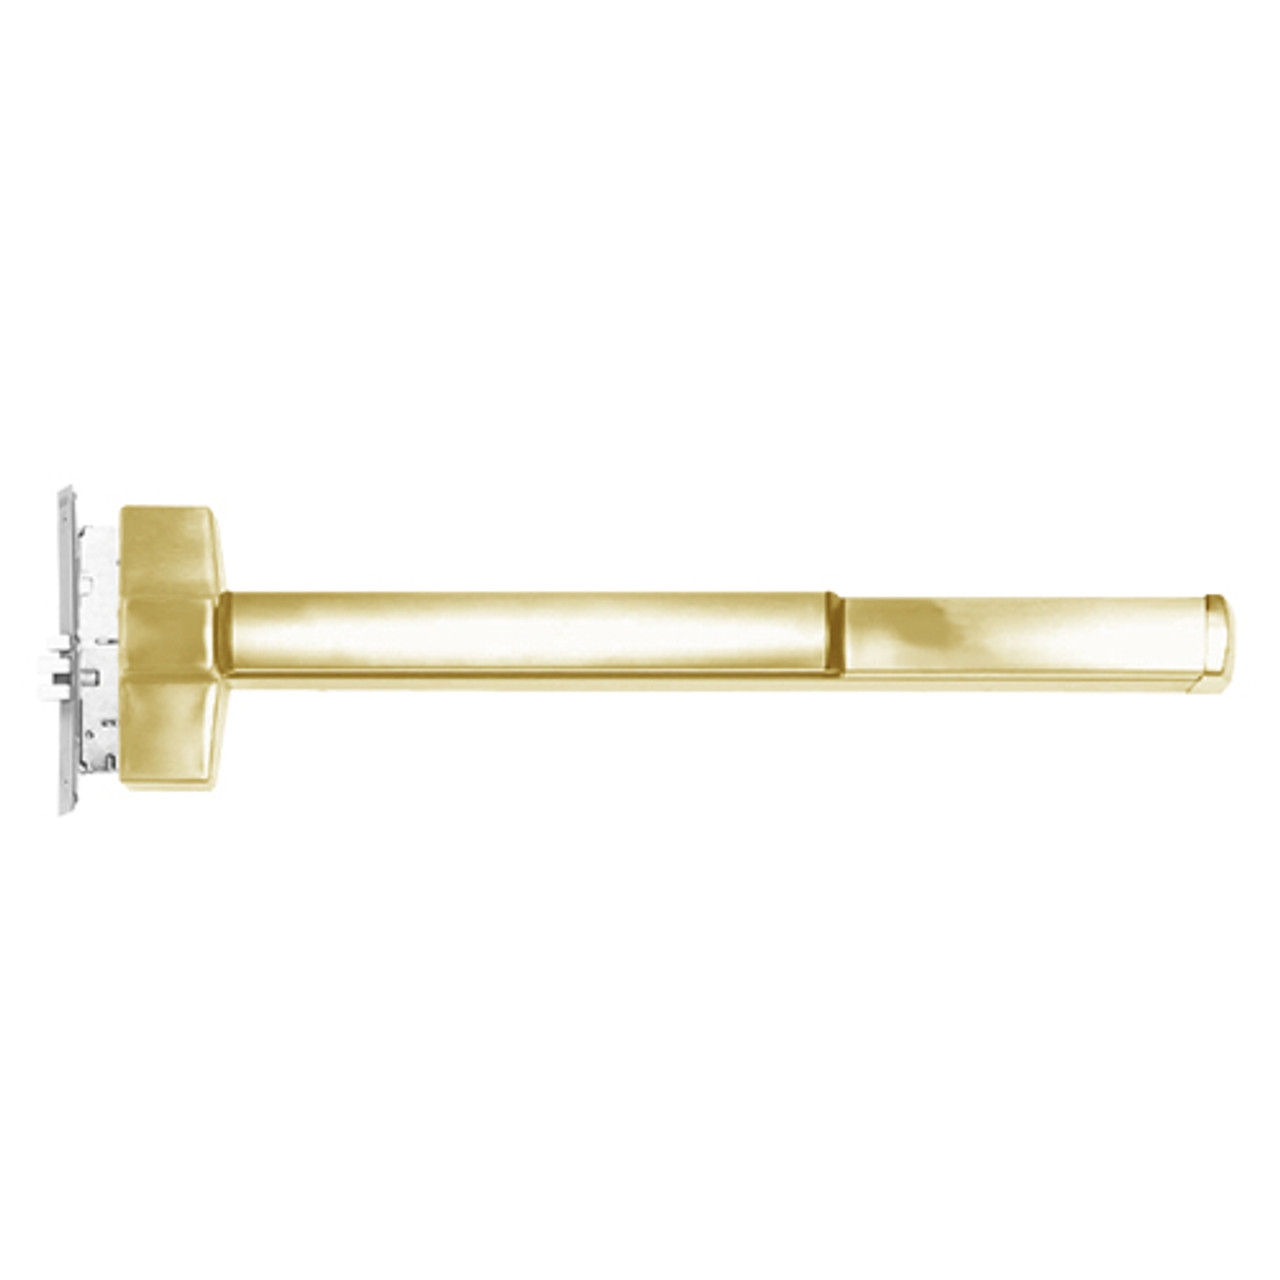 ED5600AT-606-W048-LHR Corbin ED5600 Series Fire Rated Mortise Exit Device in Satin Brass Finish